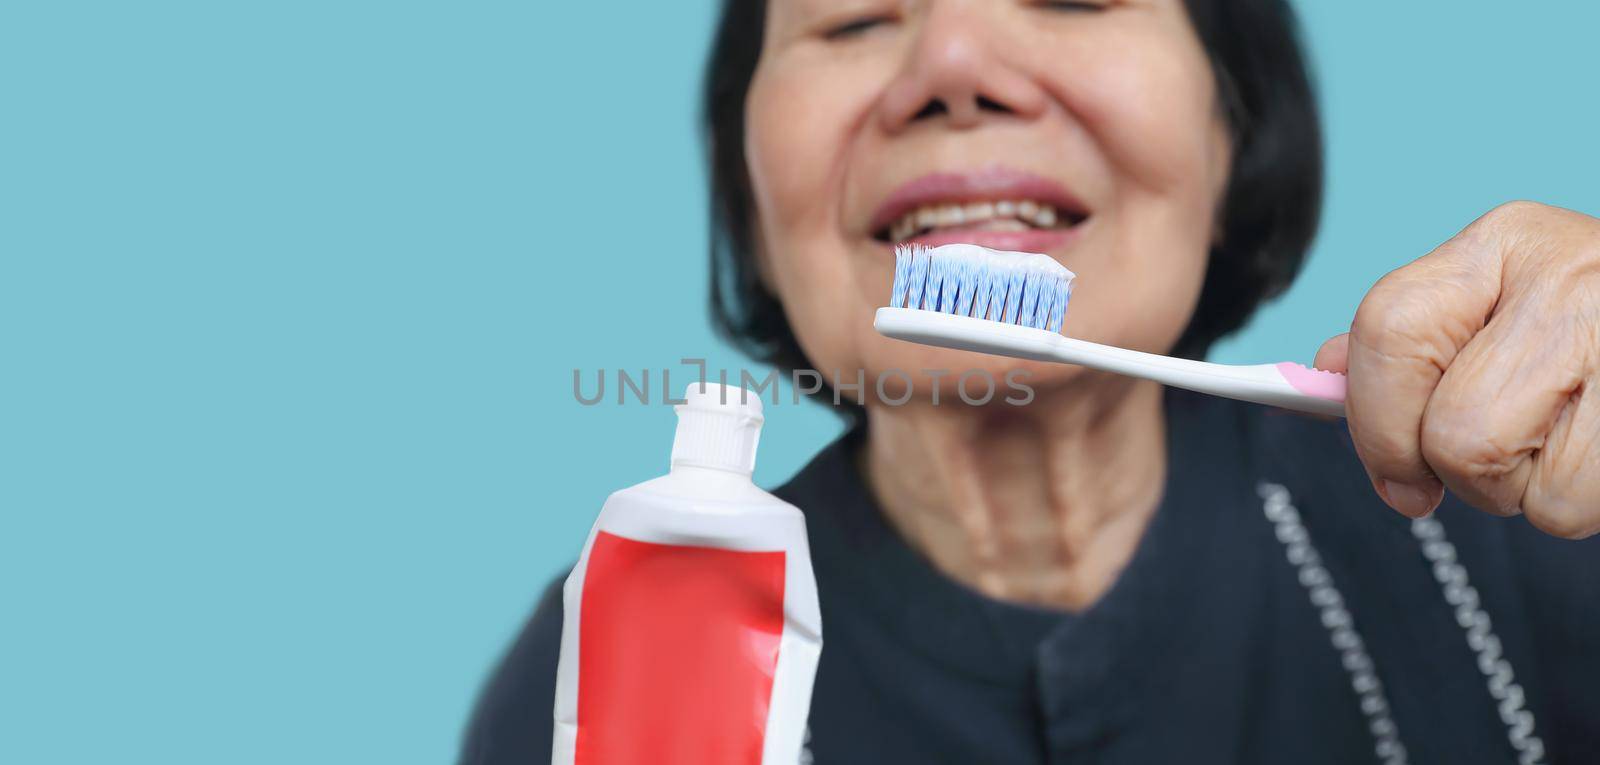 Asian elderly woman trying use toothbrush ,hand tremor . Dental health